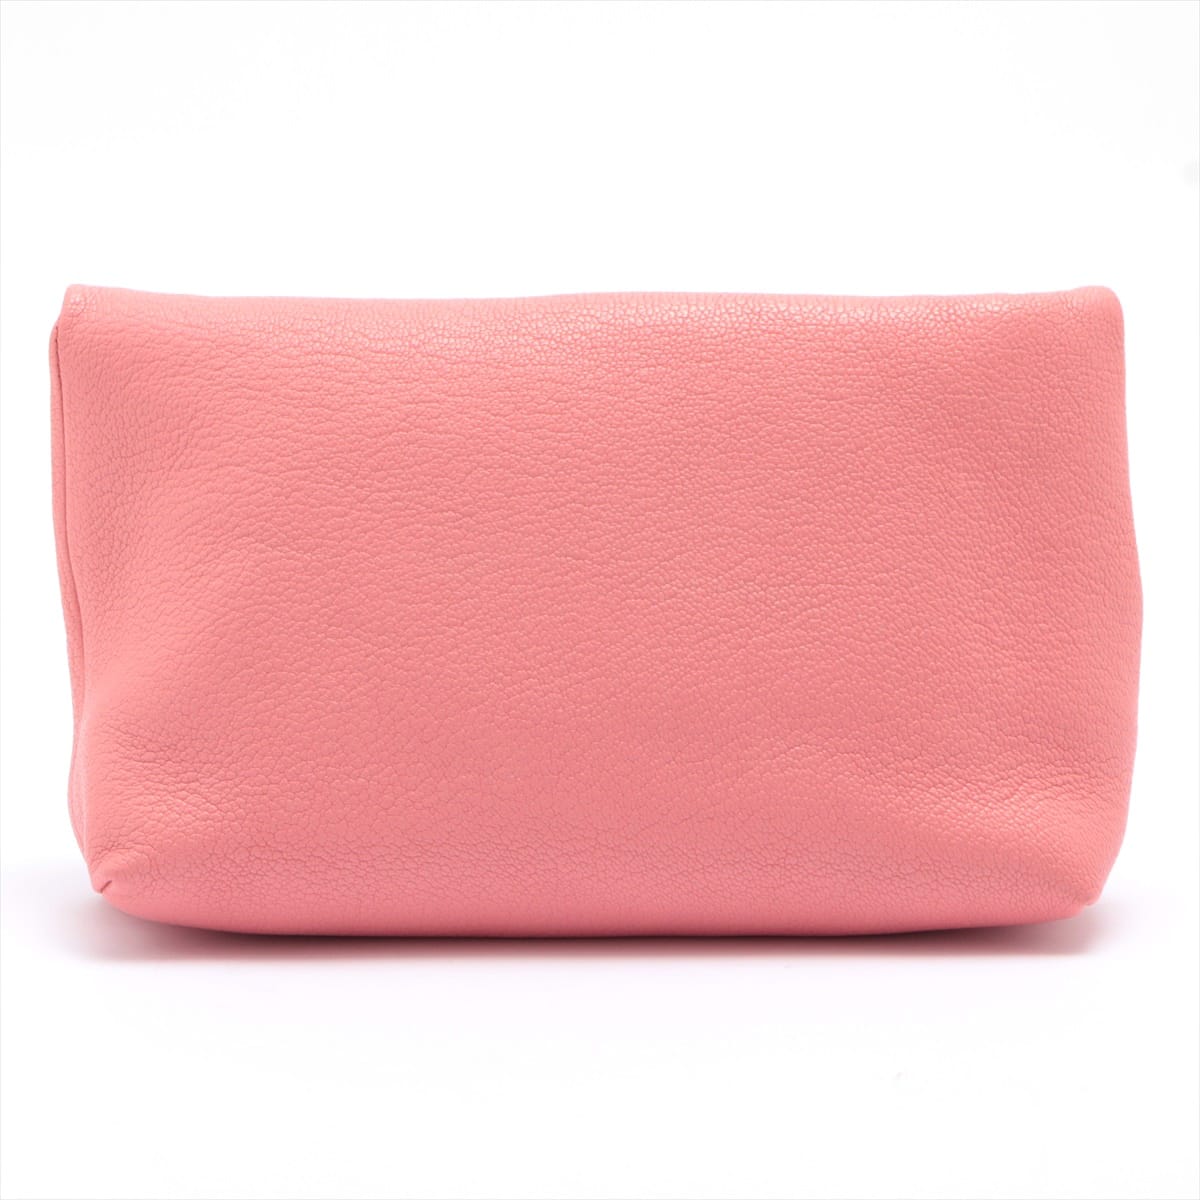 Burberry Leather Clutch bag Pink